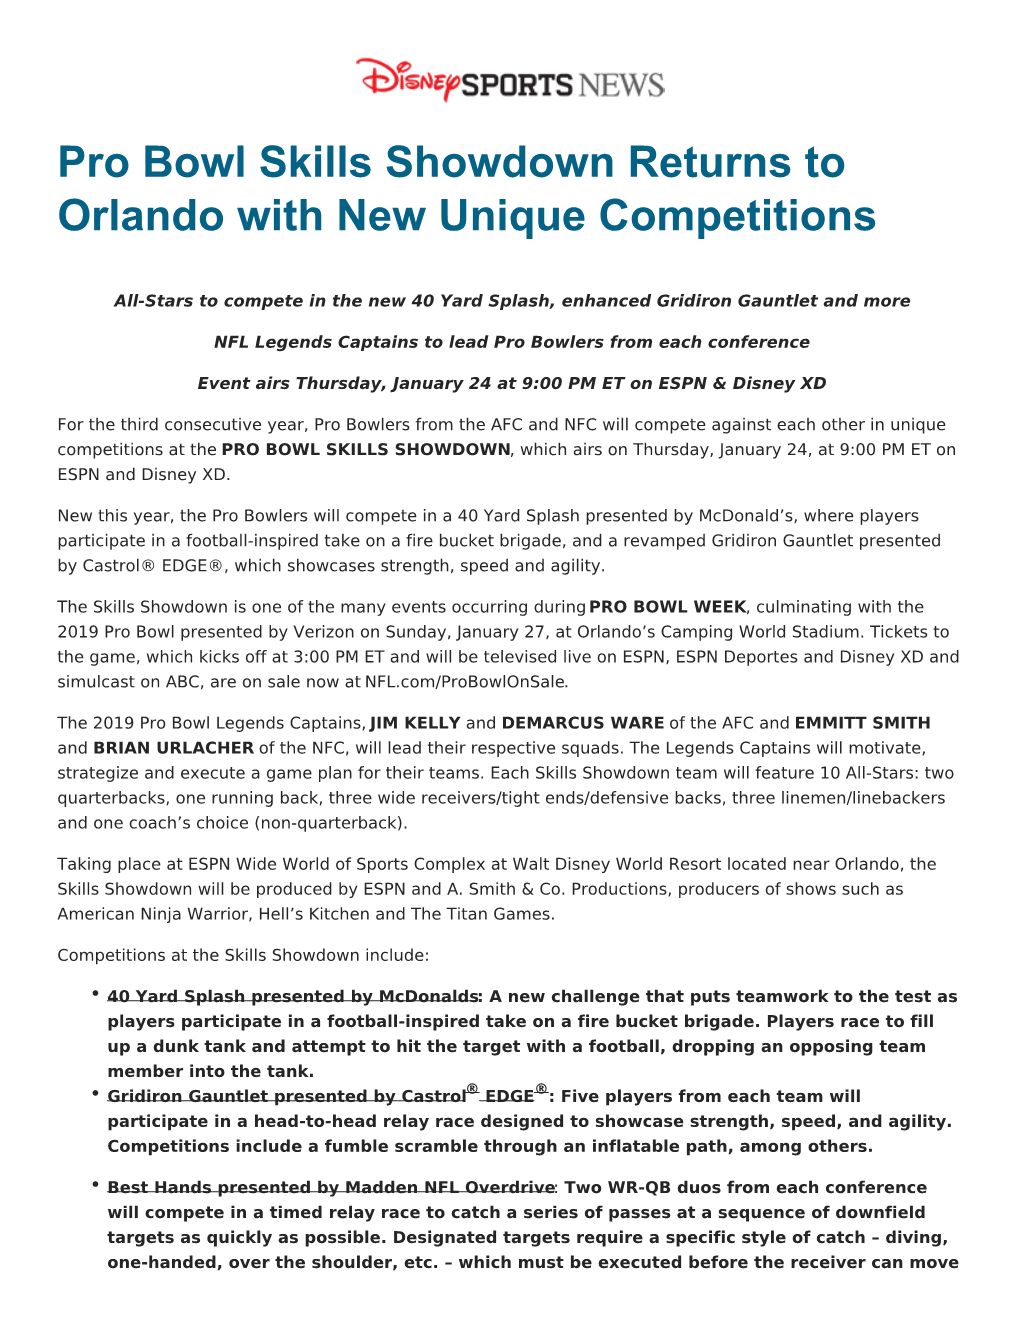 Pro Bowl Skills Showdown Returns to Orlando with New Unique Competitions